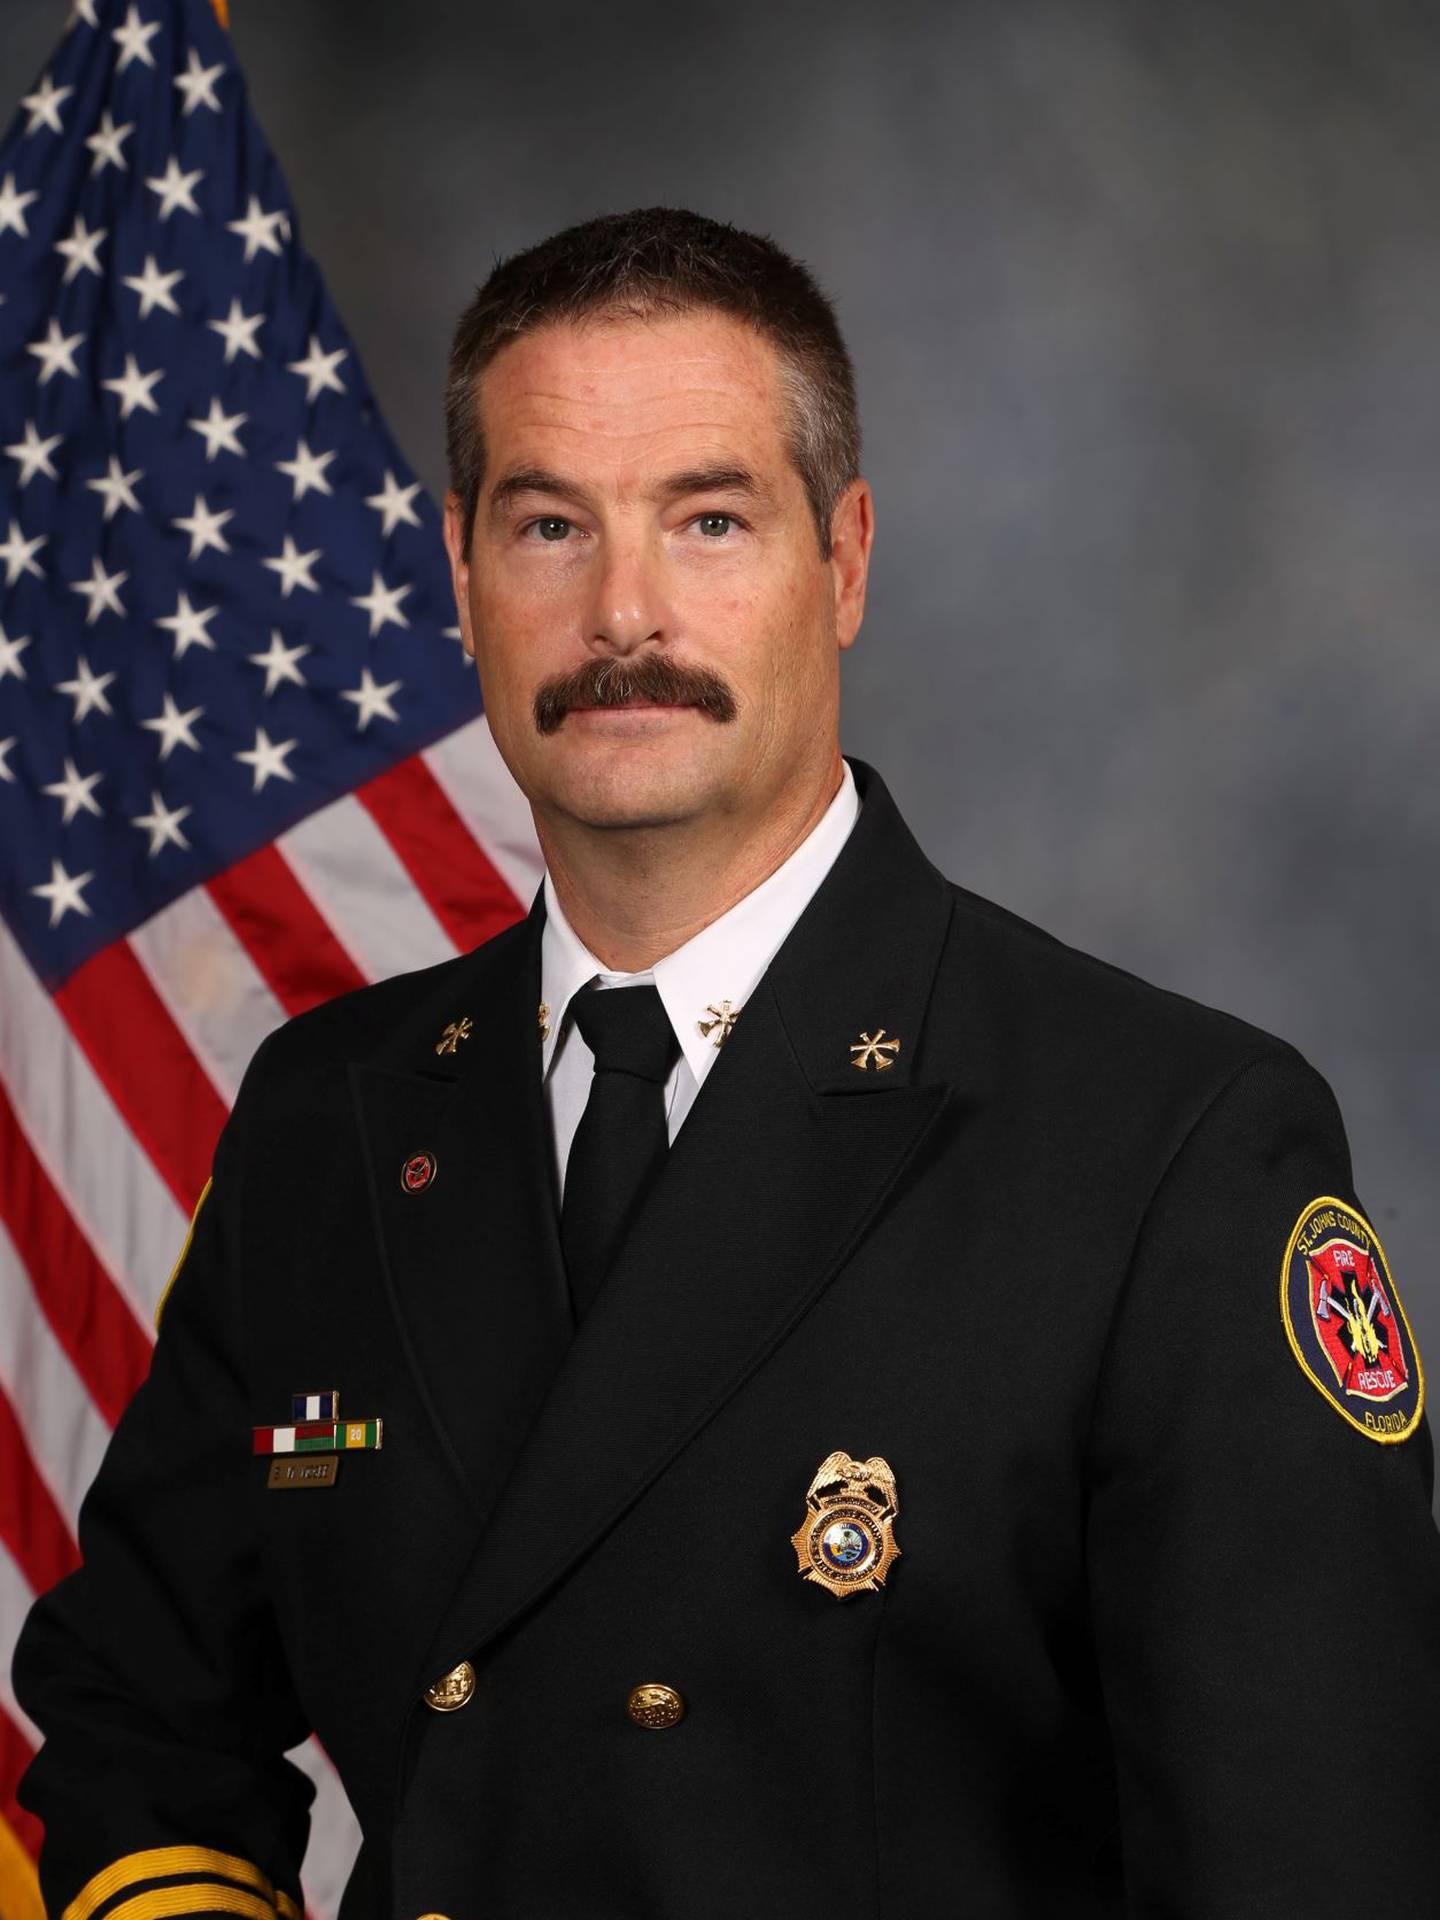 Battalion Chief Sean McGee will serve as Acting Fire Chief.